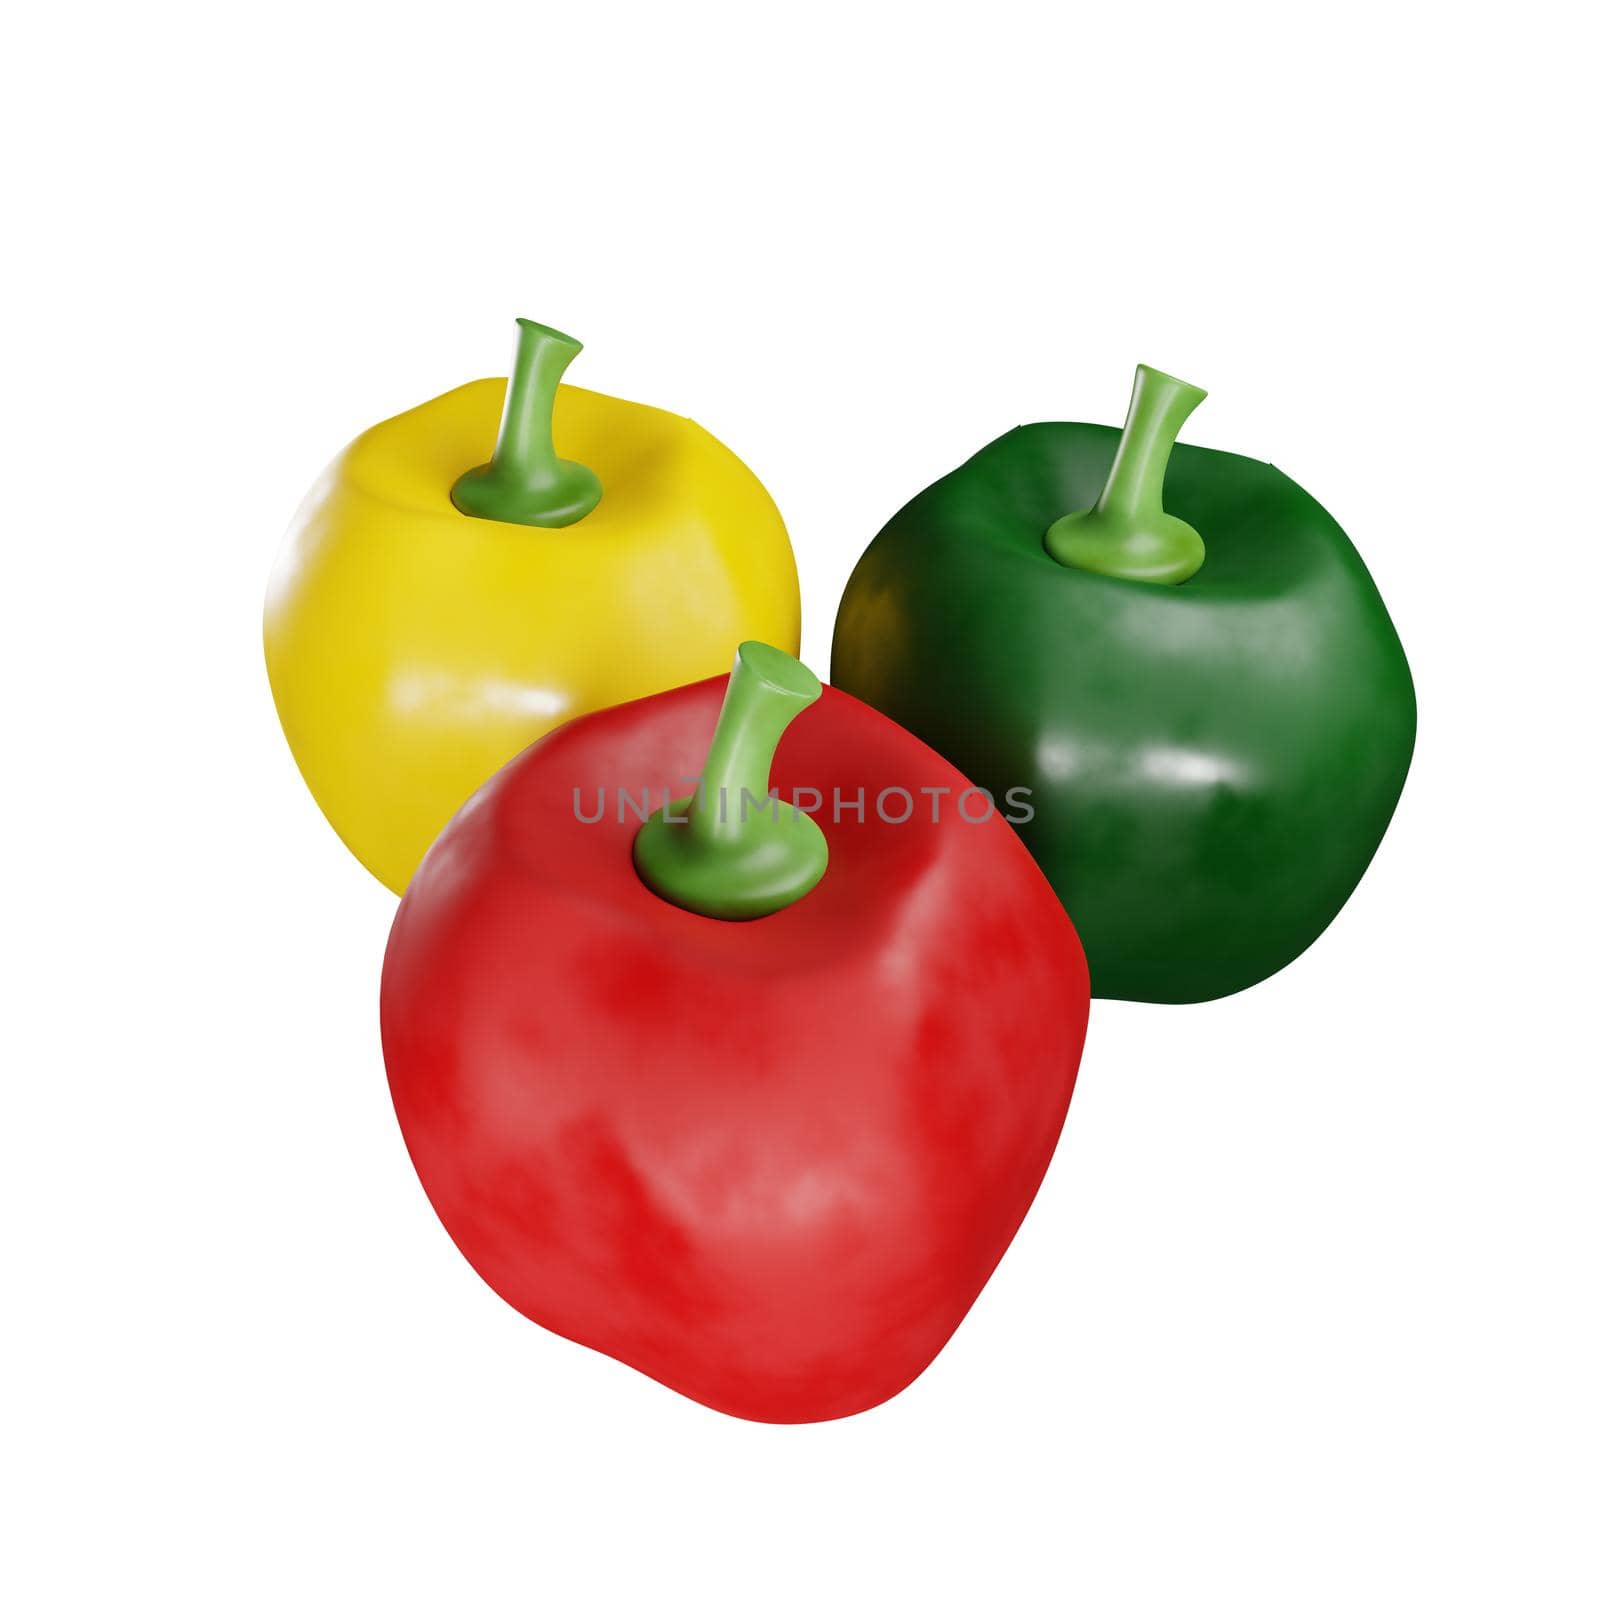 3d rendering of peppers of various colors